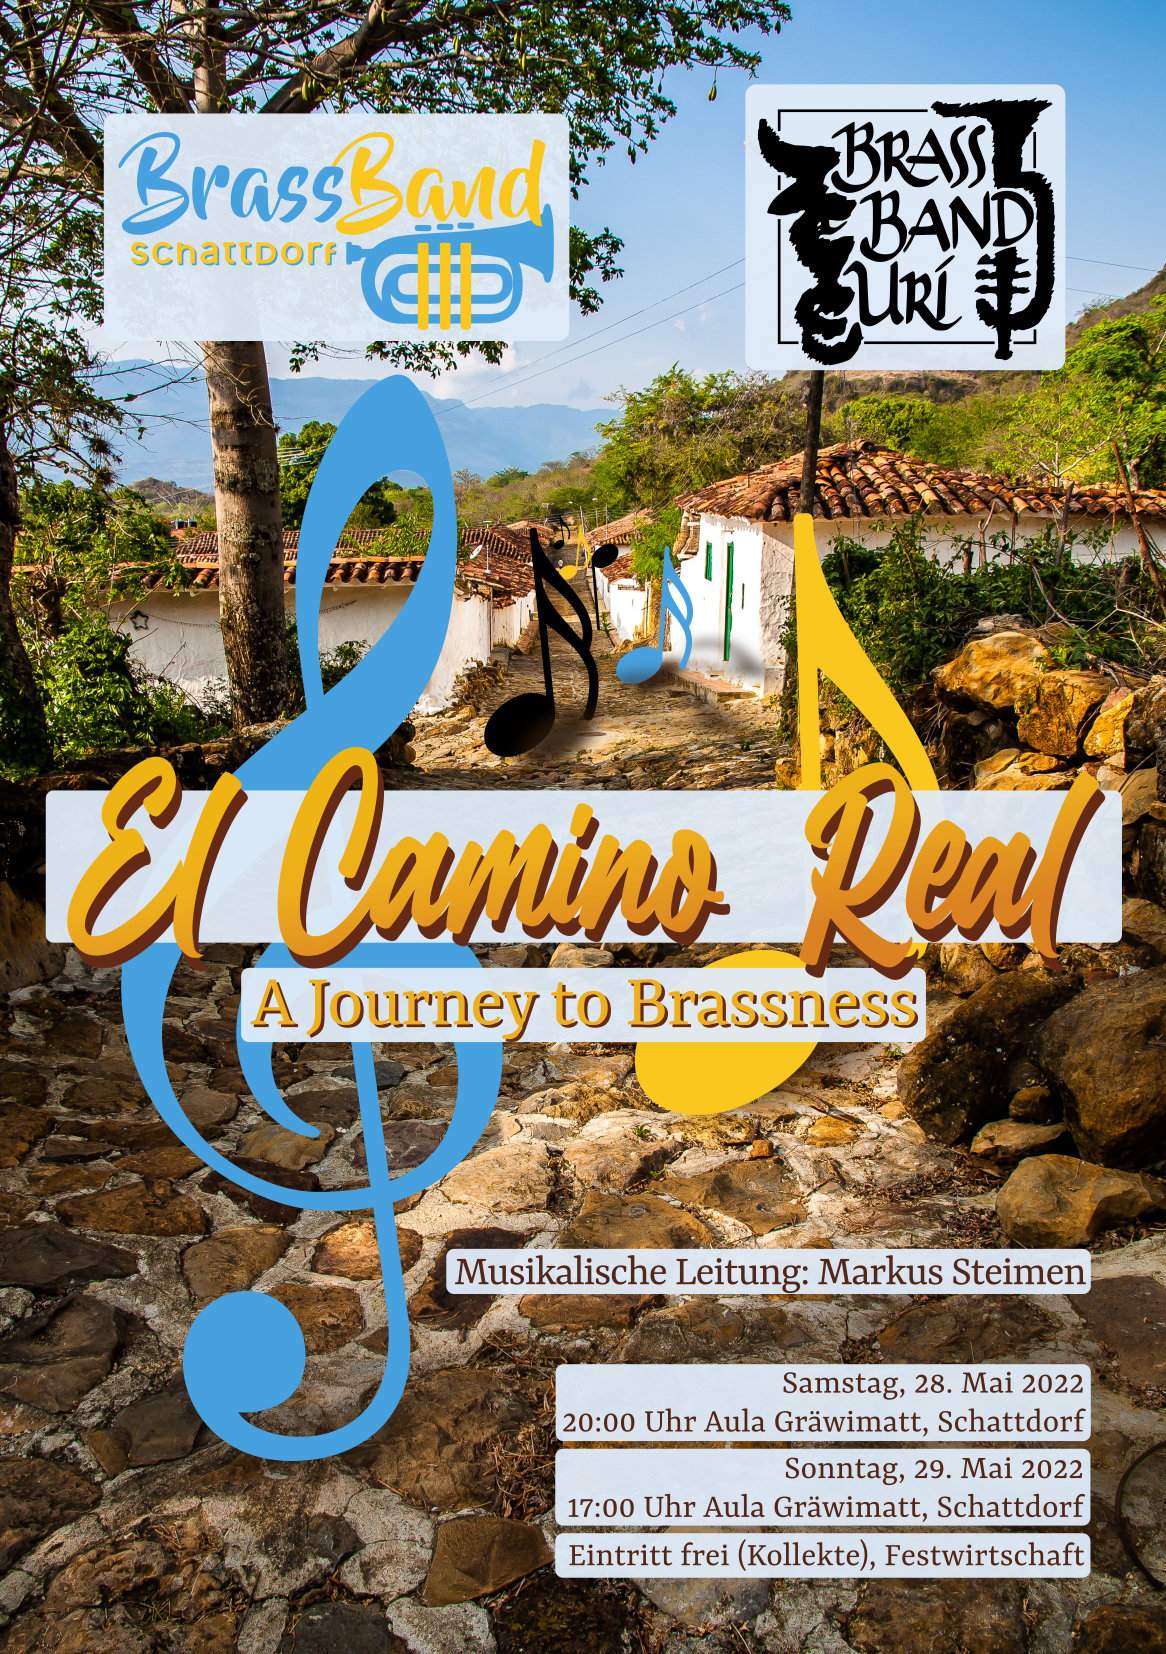 El Camino Real - A Journey to Brassness